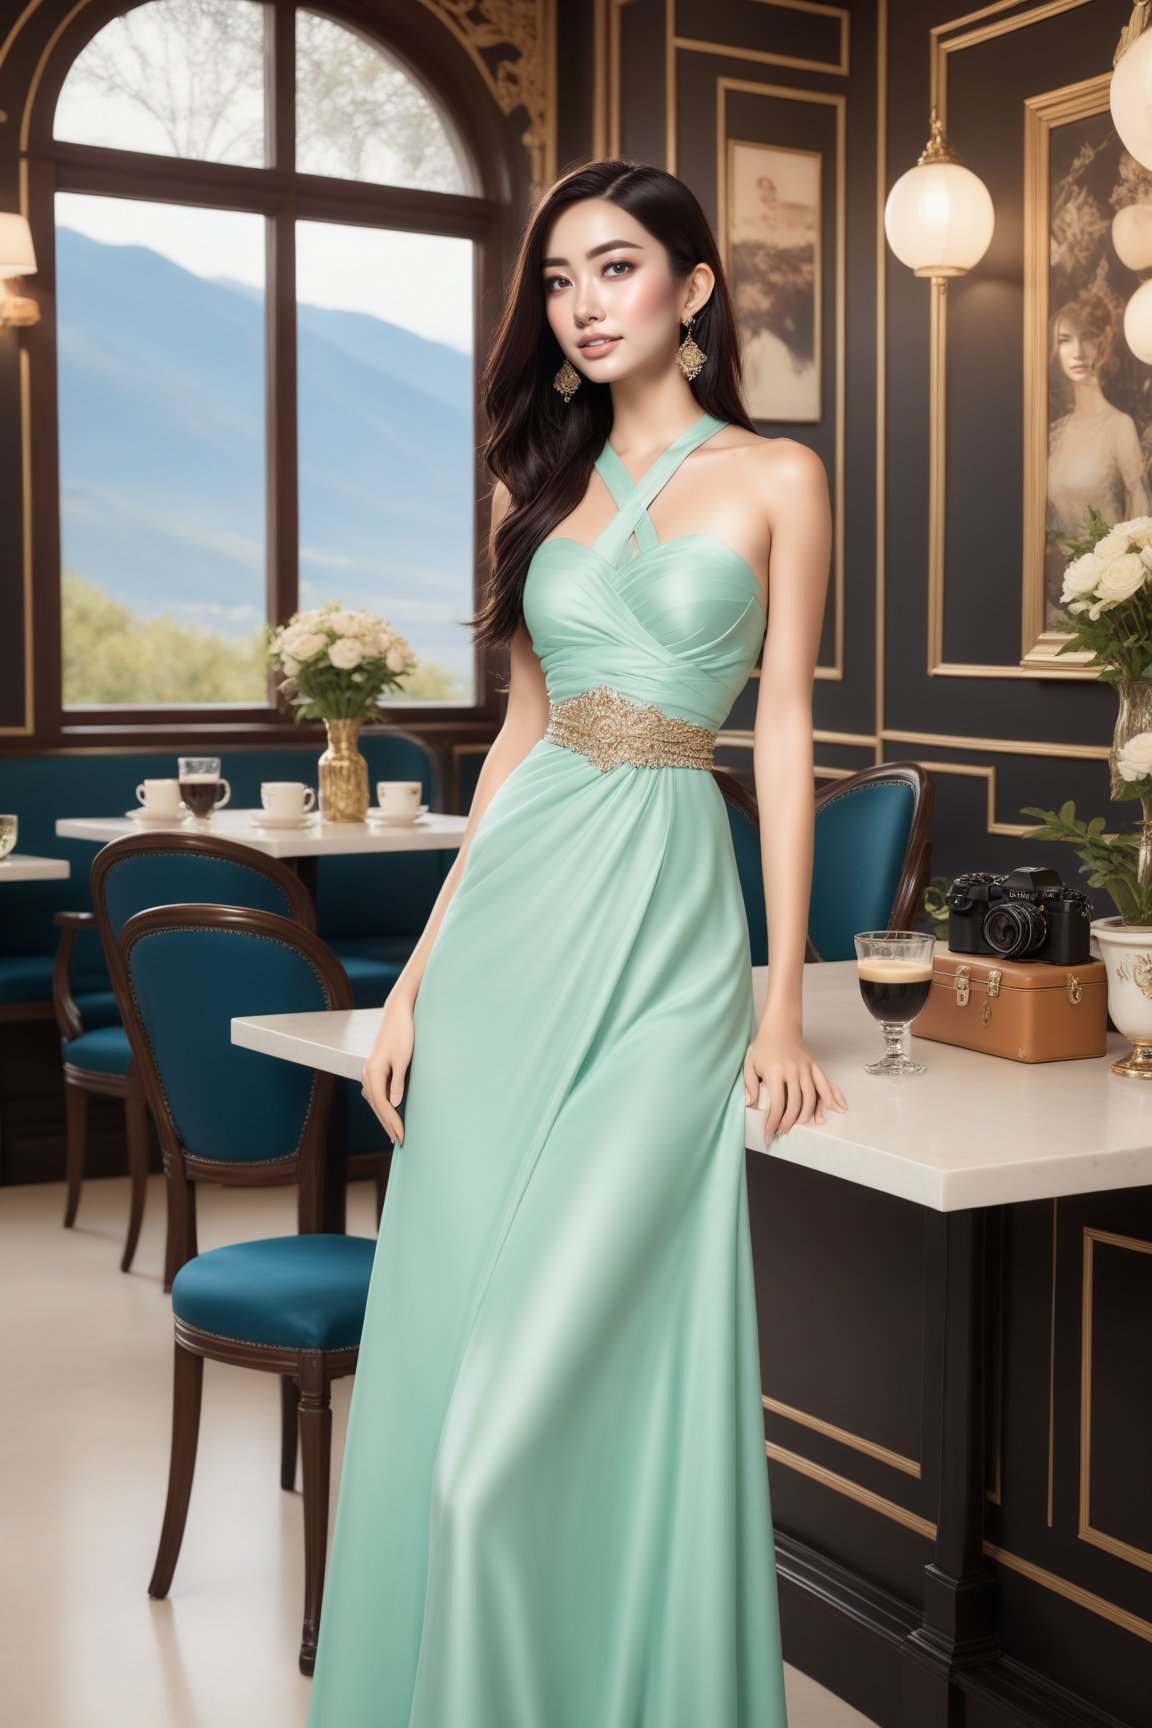 Hyper-Realistic photo of a girl sitting in a luxurious cafe,20yo,1girl,perfect female form,perfect body proportion,perfect anatomy,[Rose Gold,Deep Navy,Mint Green color],elegant dress,detailed exquisite face,soft shiny skin,smile,mesmerizing,disheveled hair,small earrings,necklaces,Louis Vuitton bag
BREAK
backdrop of a beautiful cafe,table,mountain view,coffee mug,people,(fullbody:1.2),(wideshot:1.2)
BREAK
(rule of thirds:1.3),perfect composition,studio photo,trending on artstation,(Masterpiece,Best quality,32k,UHD:1.4),(sharp focus,high contrast,HDR,hyper-detailed,intricate details,ultra-realistic,award-winning photo,ultra-clear,kodachrome 800:1.25),(chiaroscuro lighting,soft rim lighting:1.15),by Karol Bak,Antonio Lopez,Gustav Klimt and Hayao Miyazaki,photo_b00ster,real_booster,art_booster,kimtaeri-xl